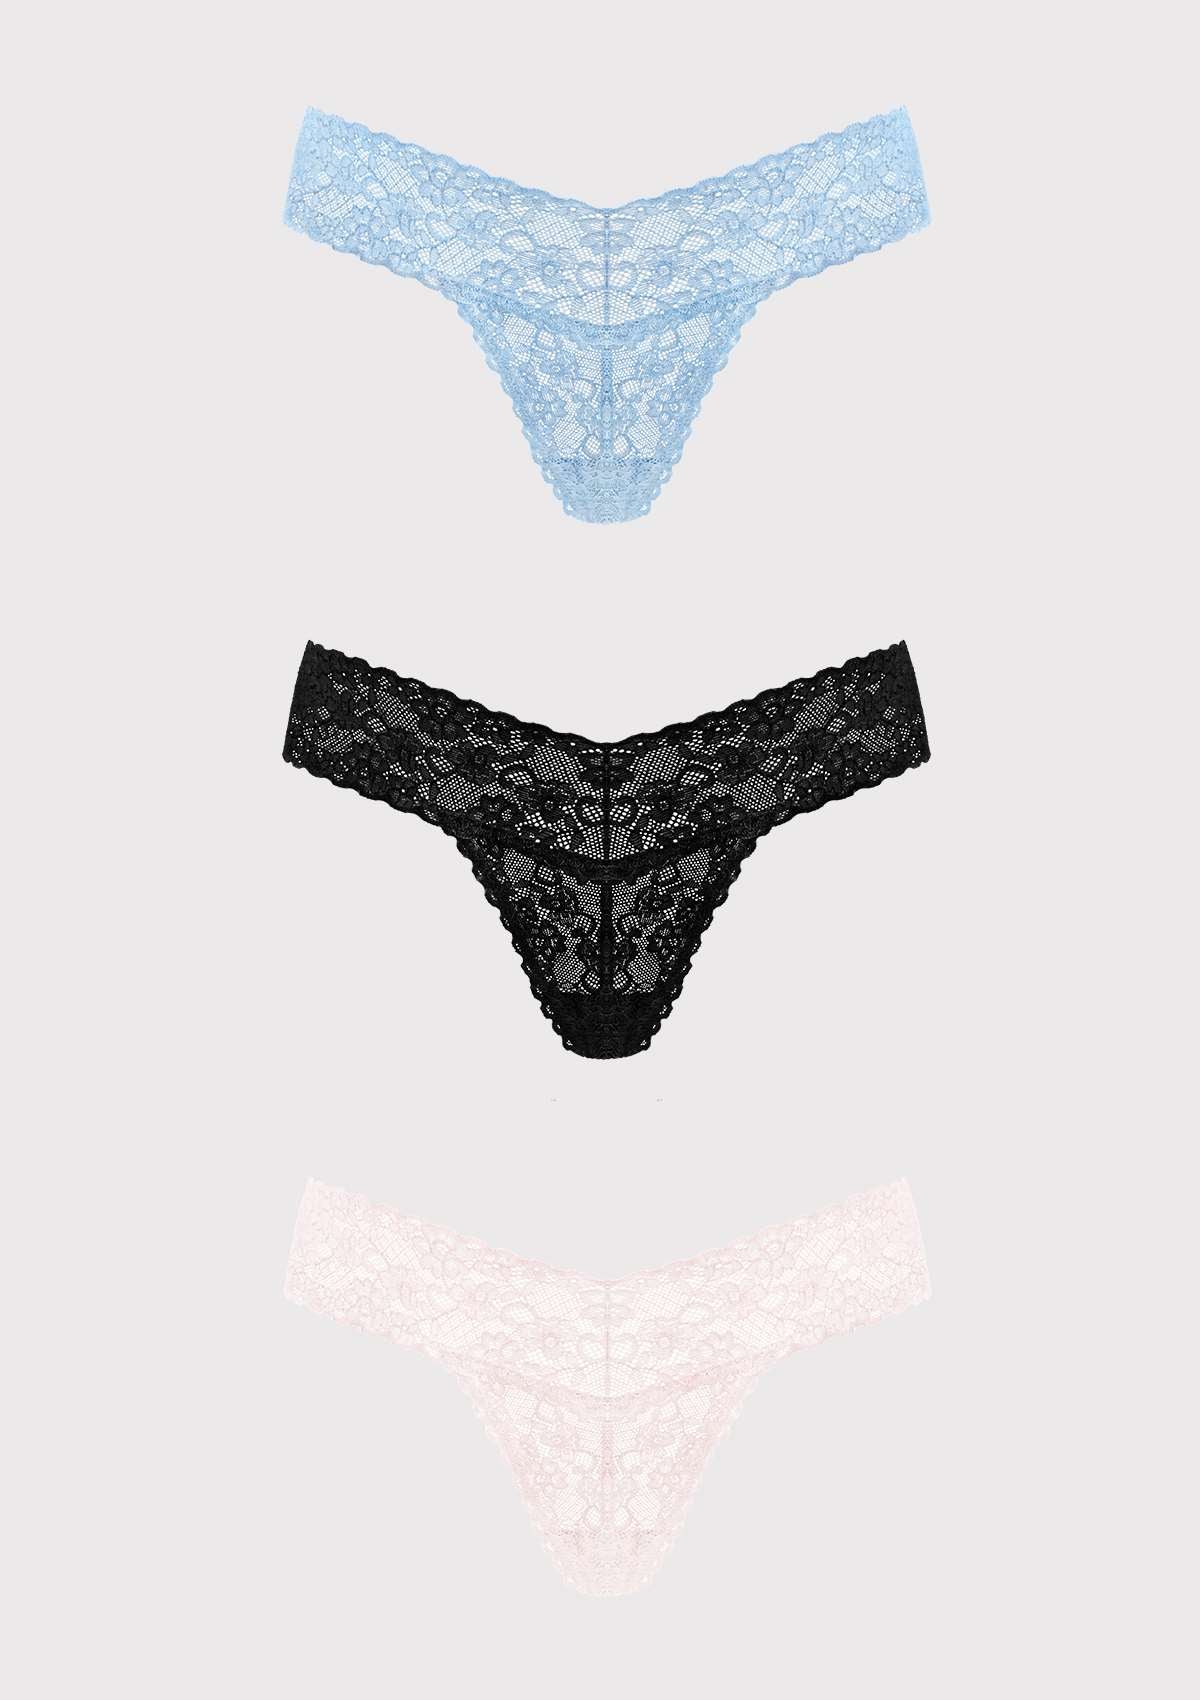 HSIA Soft Sexy Lace Cheeky Thong Underwear 3 Pack - XL / Black+Storm Blue+Dusty Peach